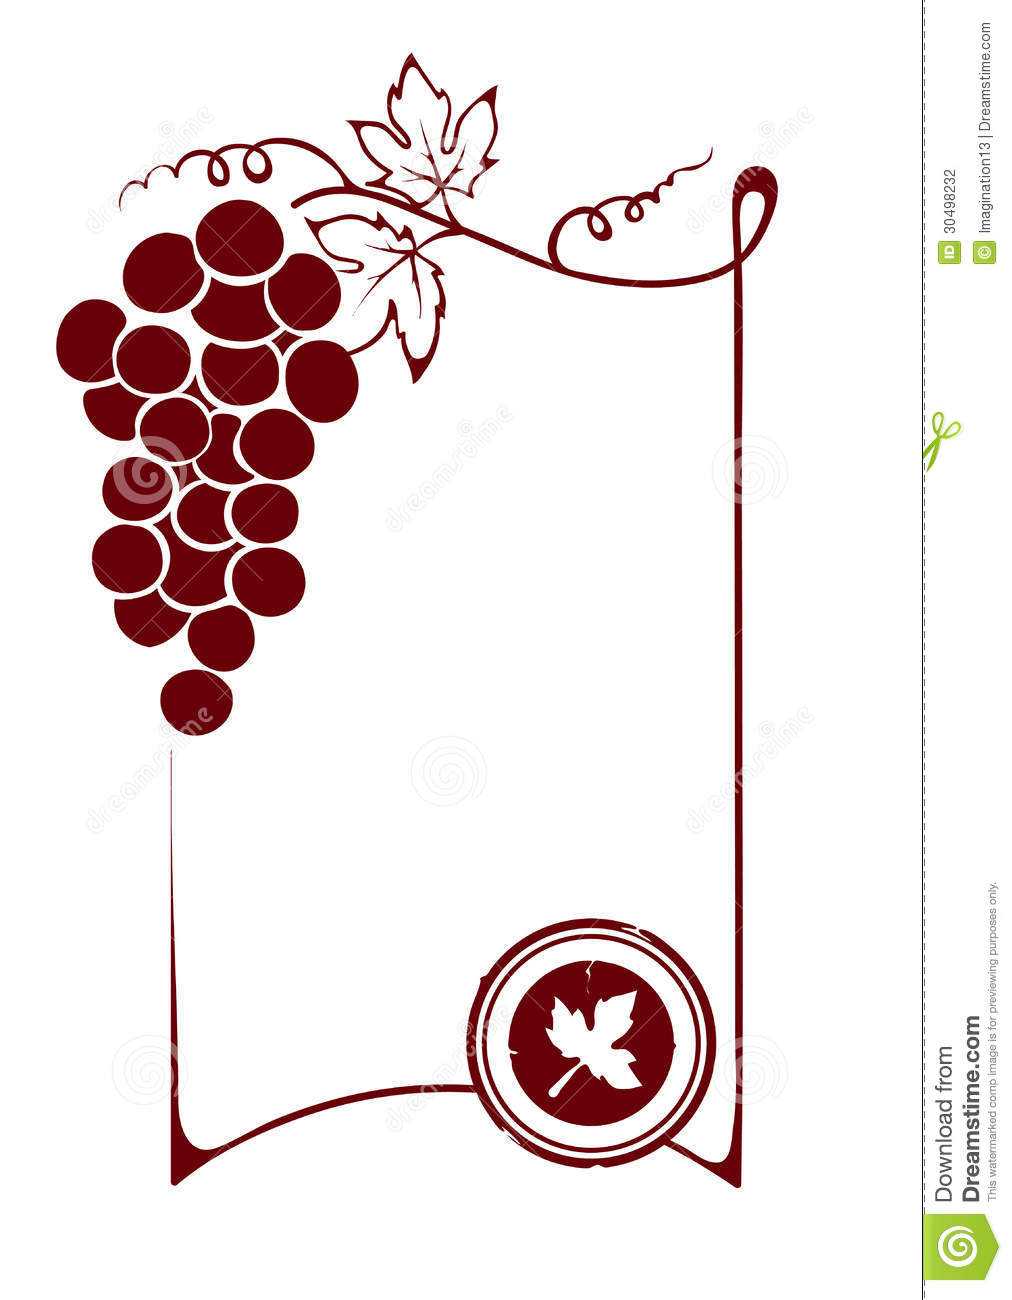 The Blank Wine Label Stock Vector. Illustration Of Decor In Blank Wine Label Template